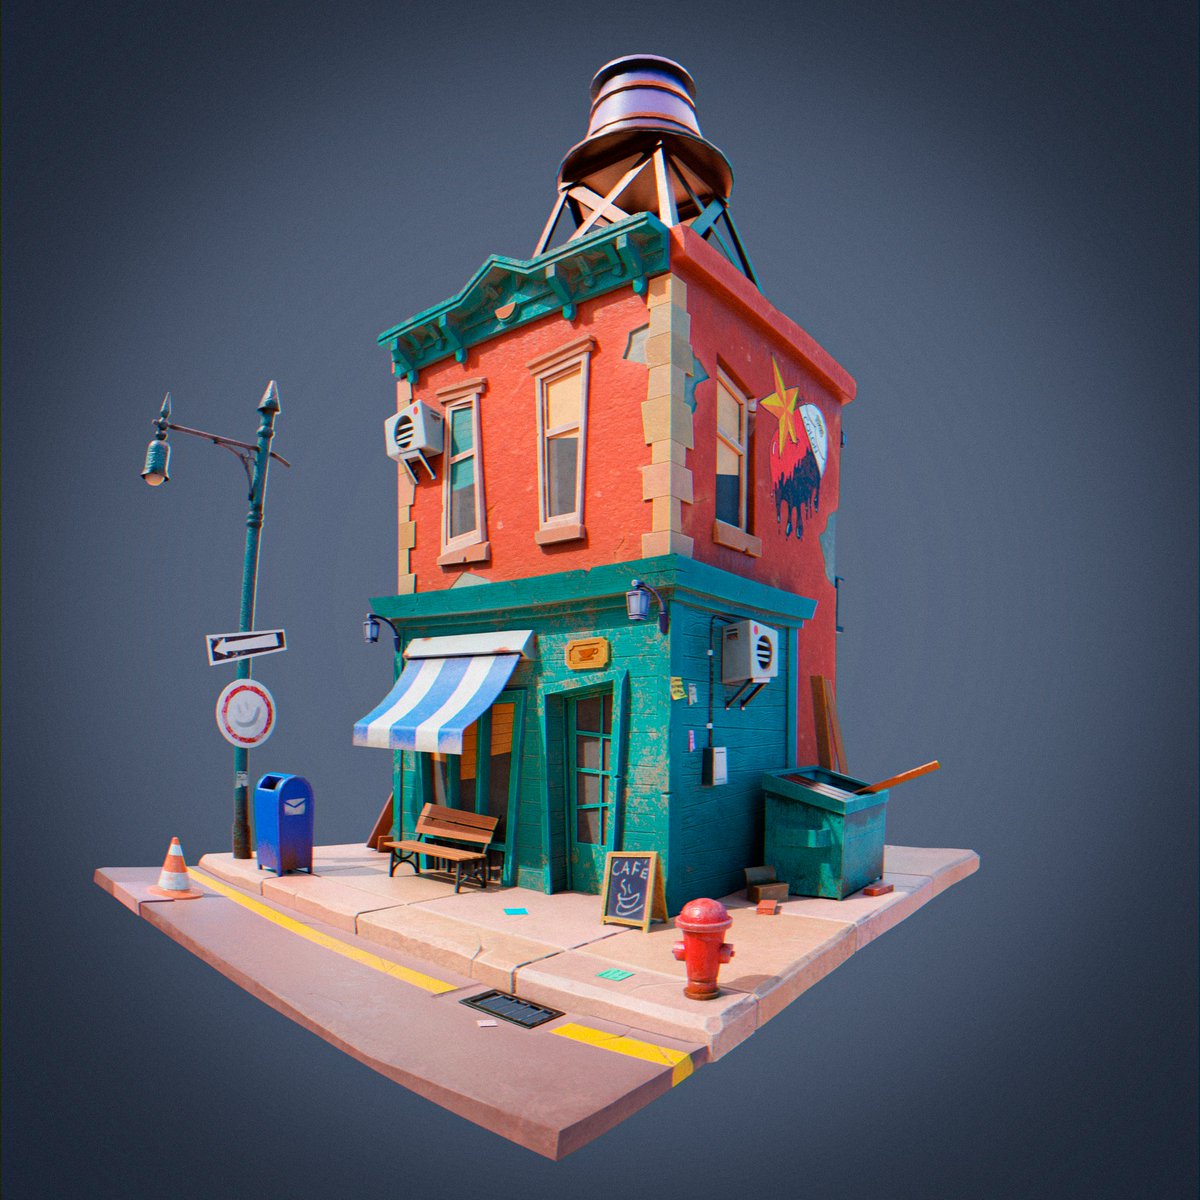 This is my 3d version of the concept art 'NY Cafe', from Igor Rozovny
see more in my artstation: artstation.com/artwork/ZaRPqR

#gameart #gamedev #3d #3dmodeling #3dart #ArtistOnTwitter #3DModel #b3d #zbrush #blender #maya #MadeWithSubstance #stylized #cartoon